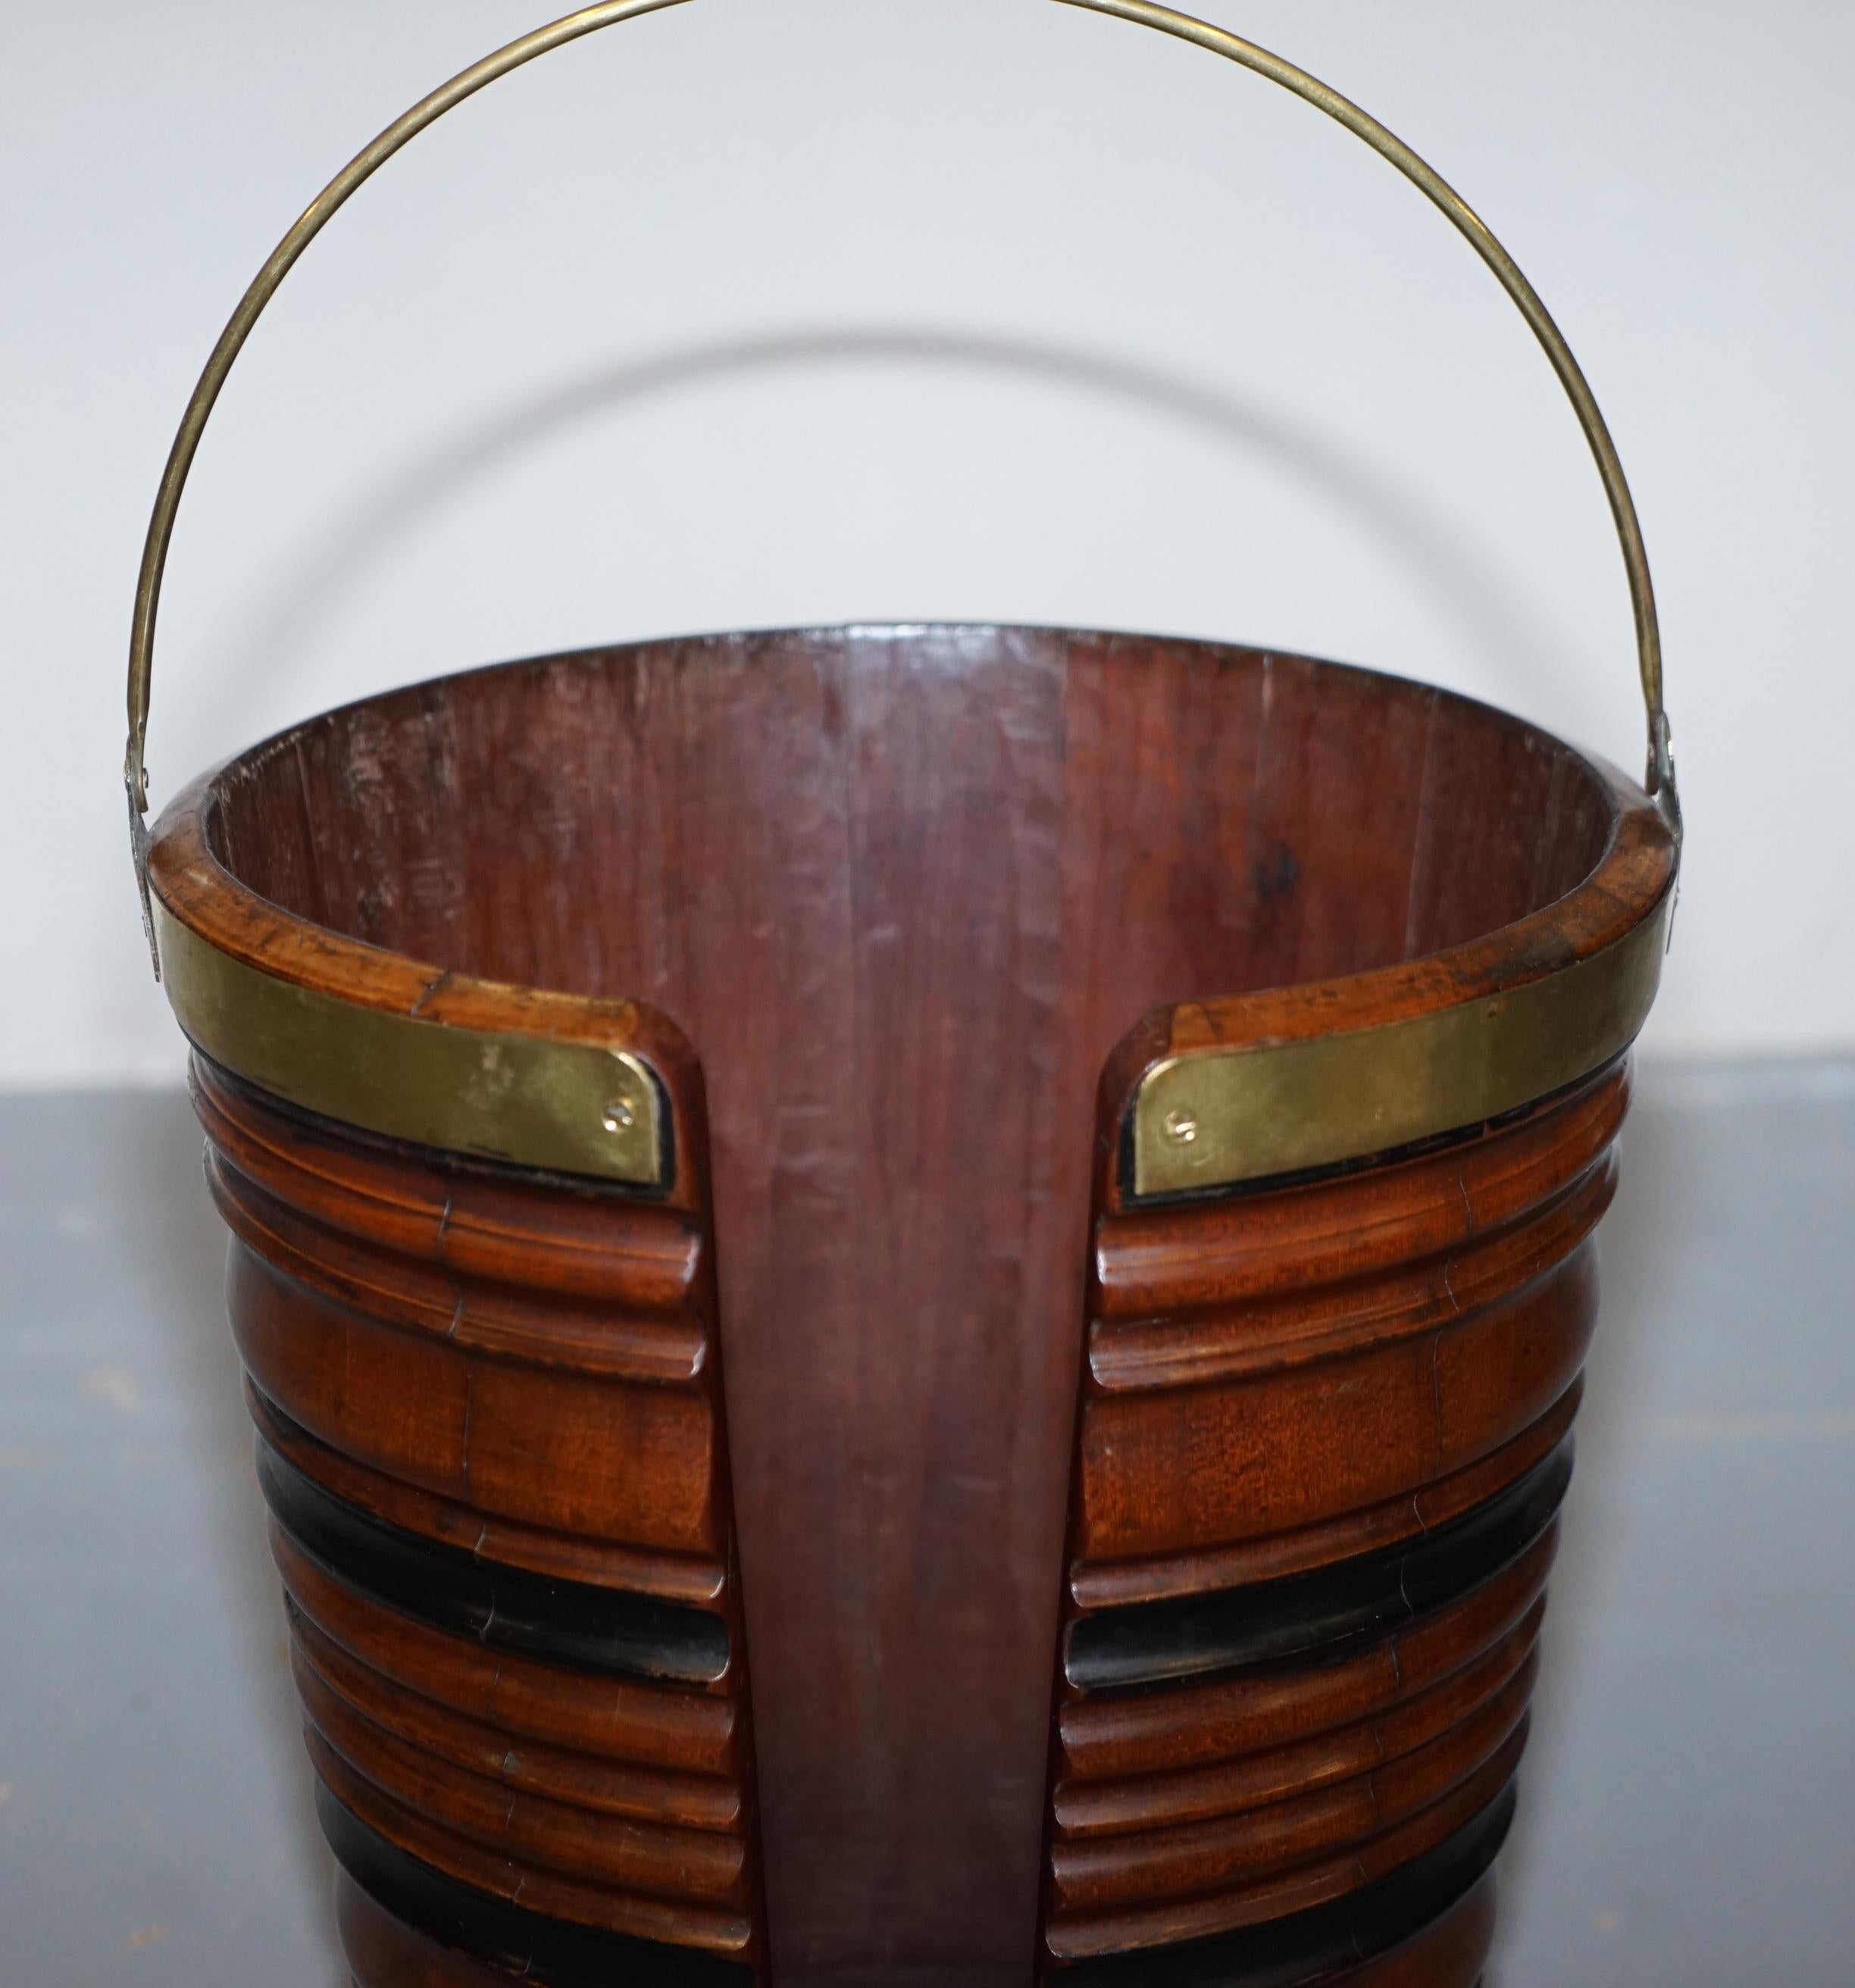 Rare Pair of George III 1780 Plate or Peat Buckets Georgian Hardwood and Brass For Sale 10